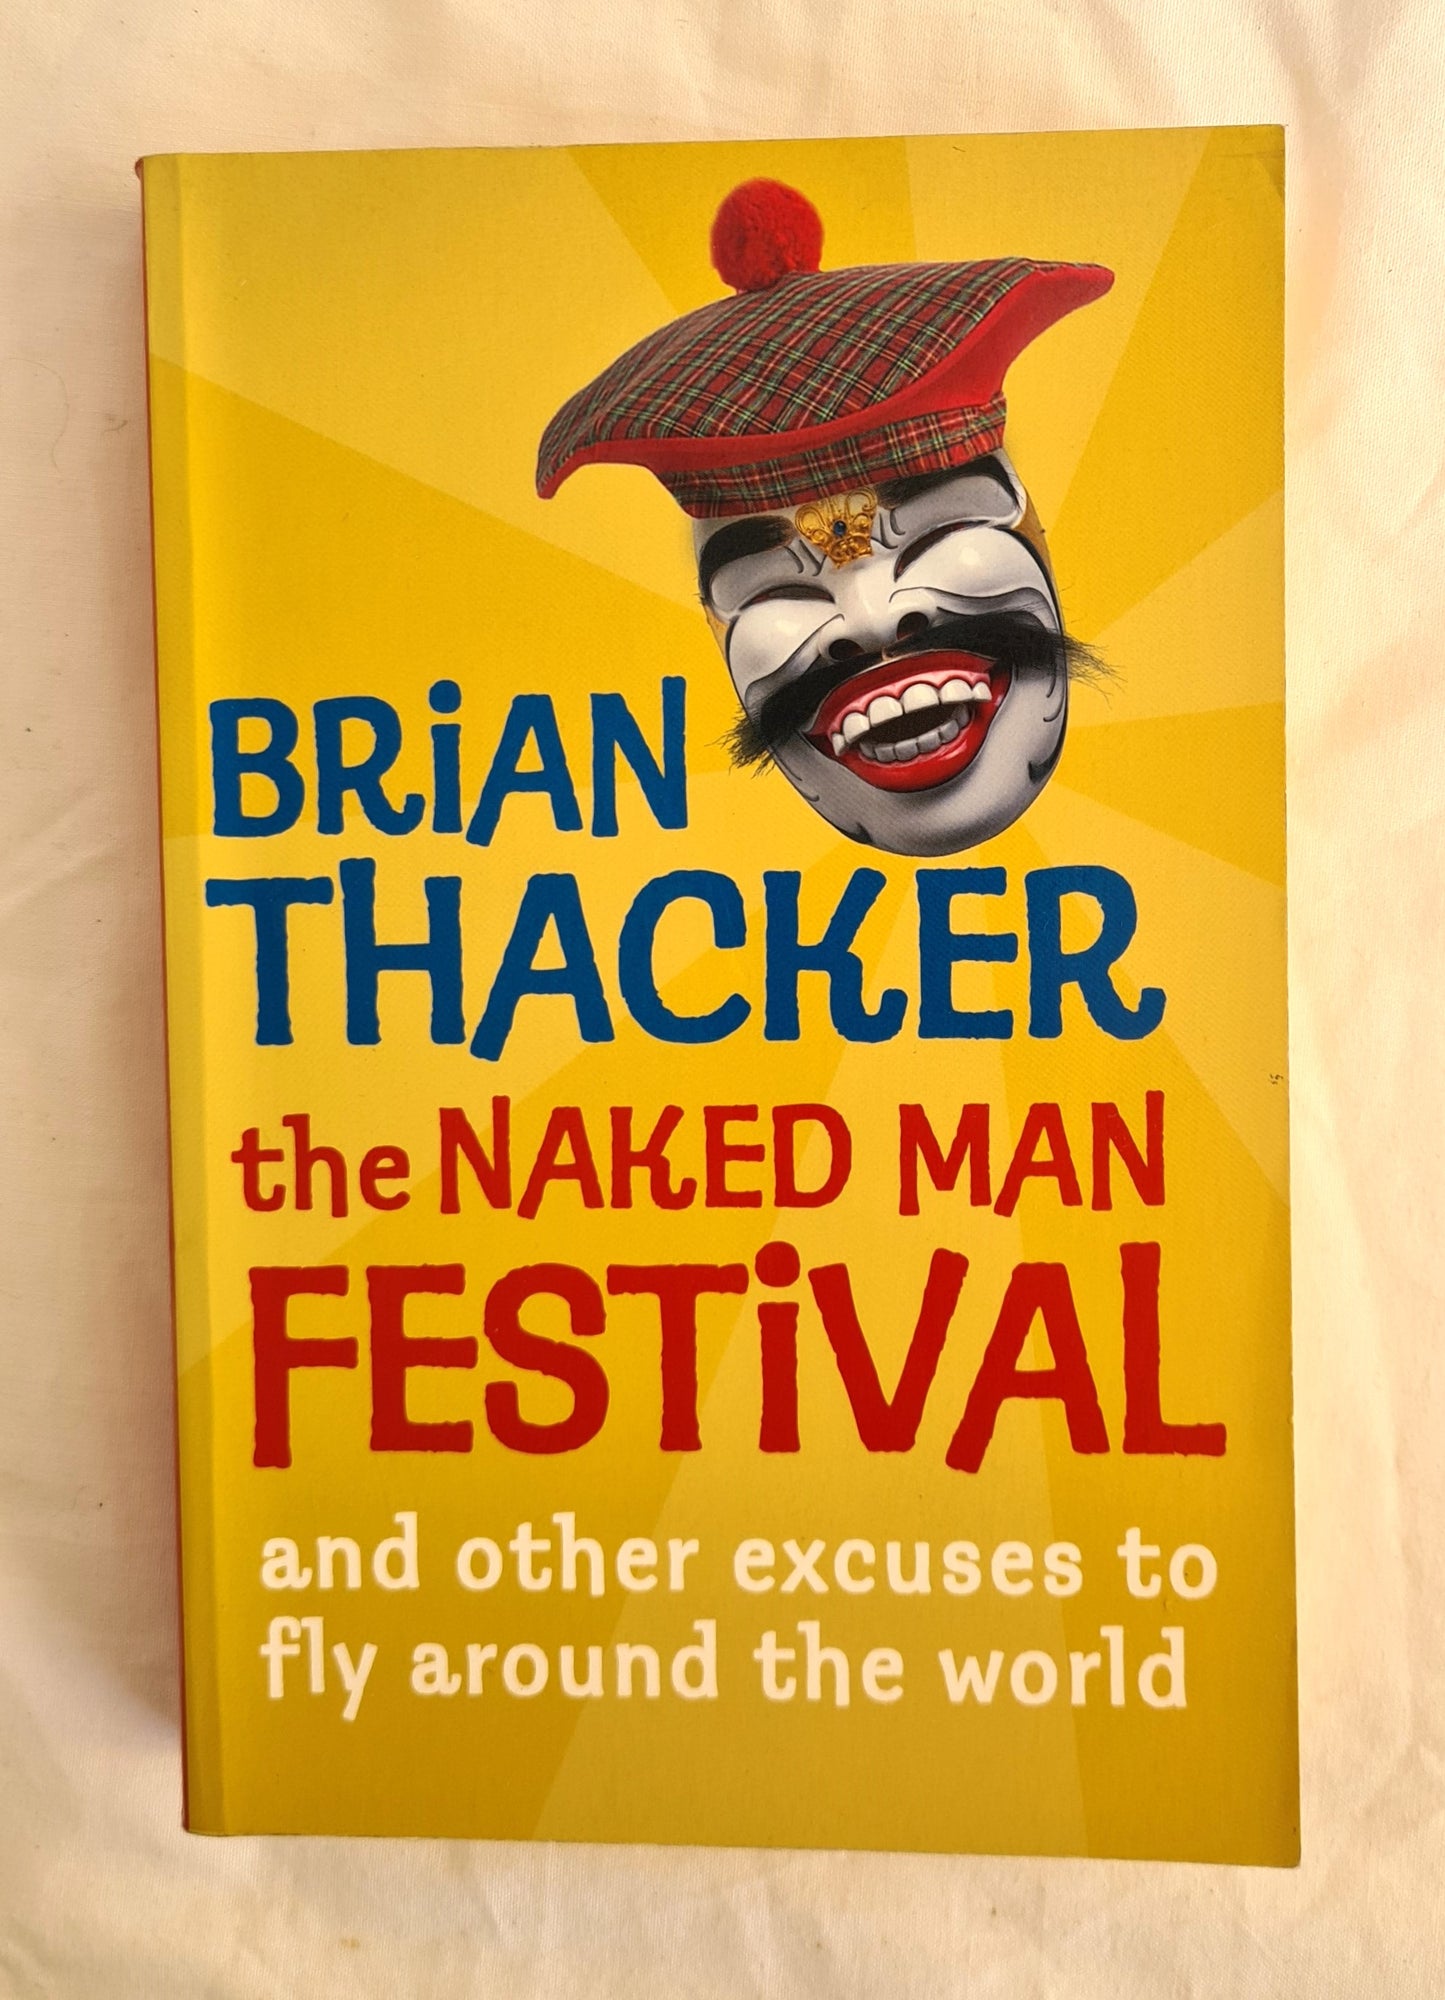 The Naked Man Festival  And other excuses to fly around the world  by Brian Thacker